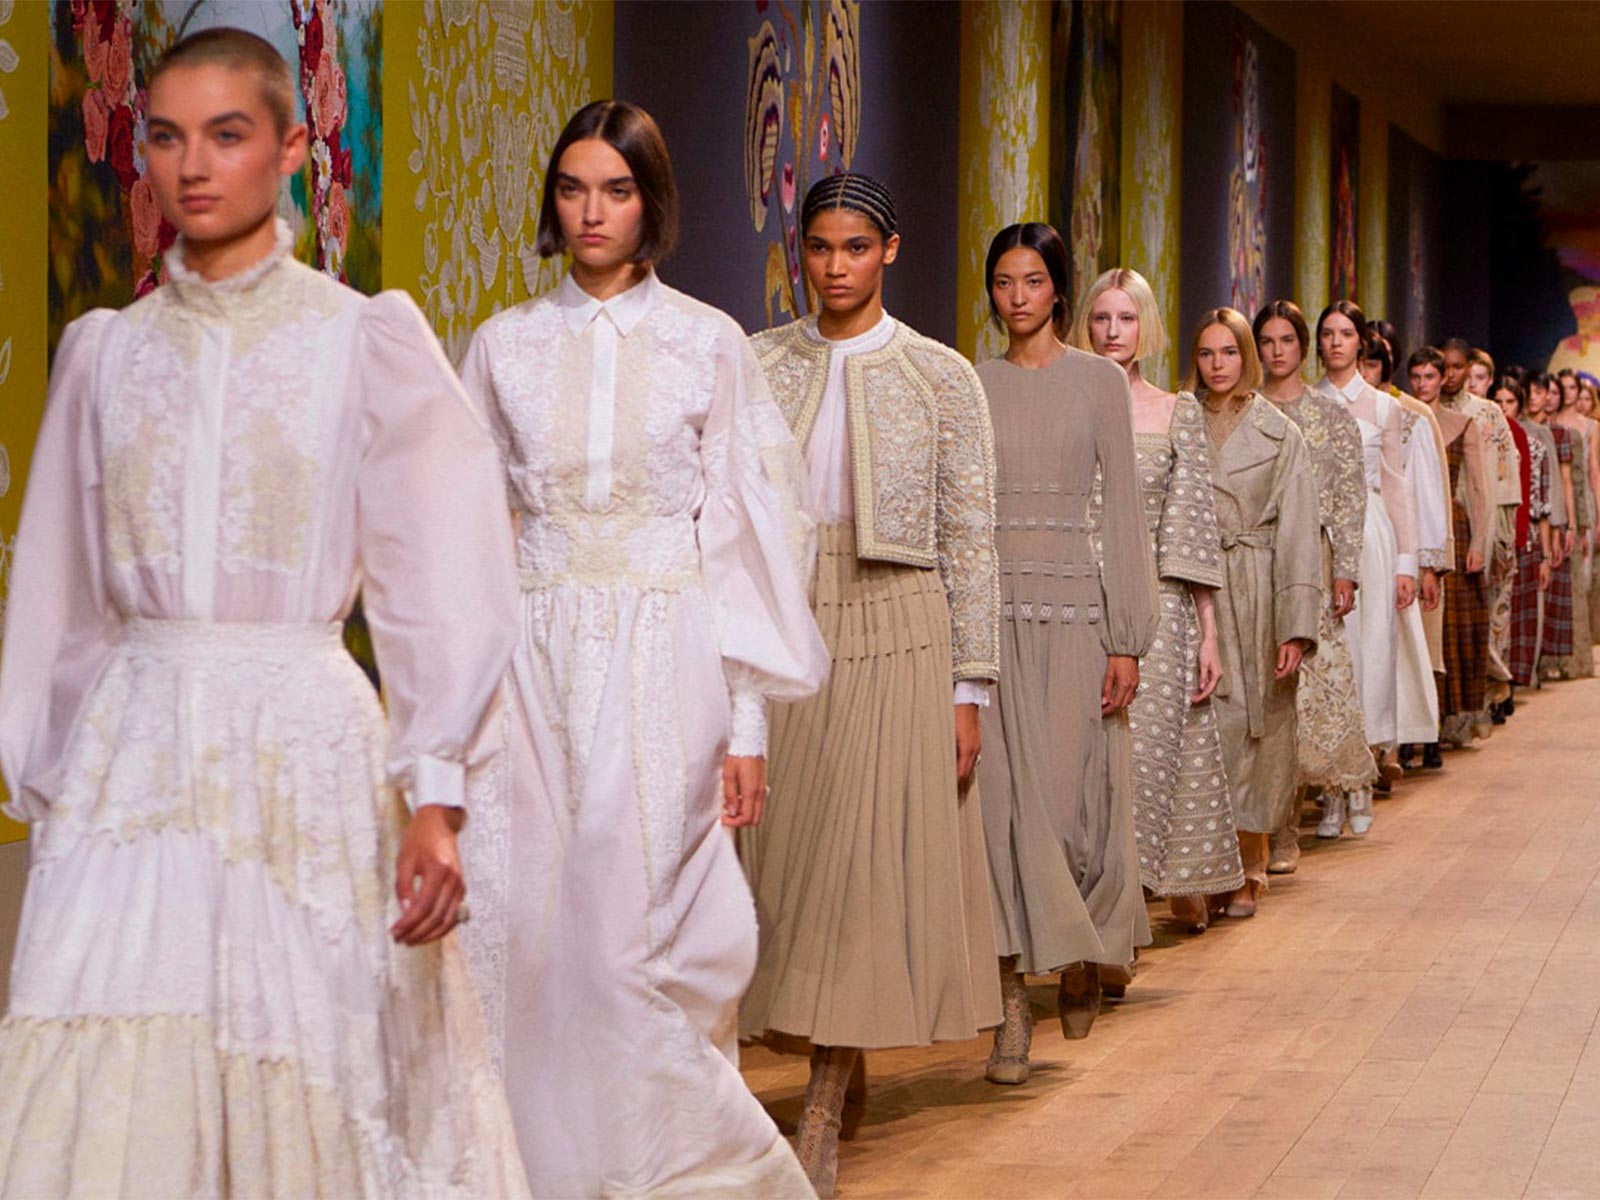 Religion, art and fashion come together at Dior’s FW23 Haute Couture show